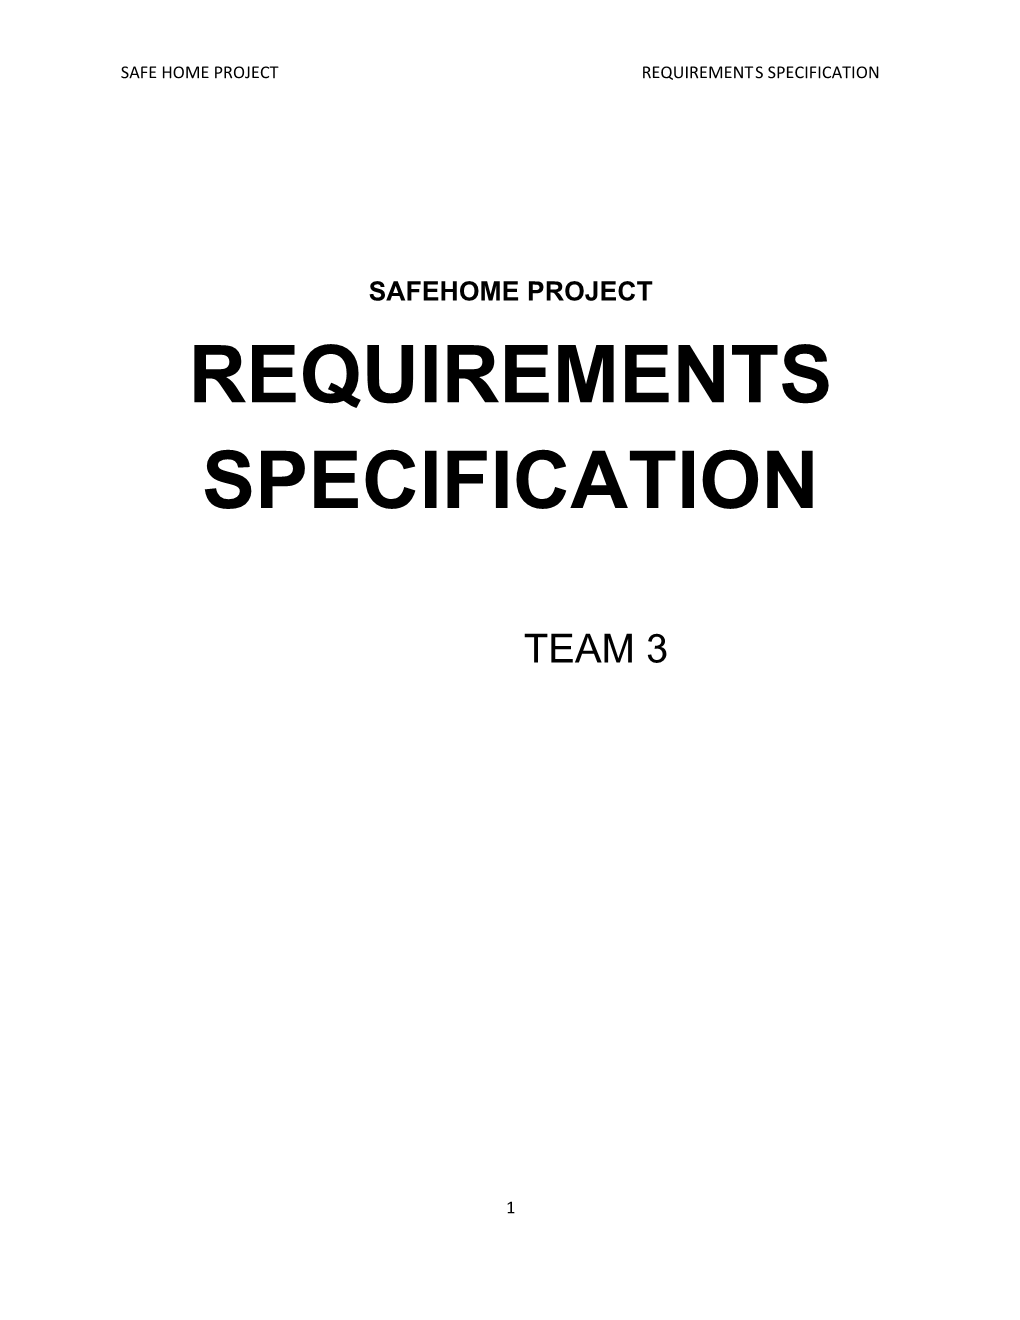 Safe Home Project Requirementsspecification